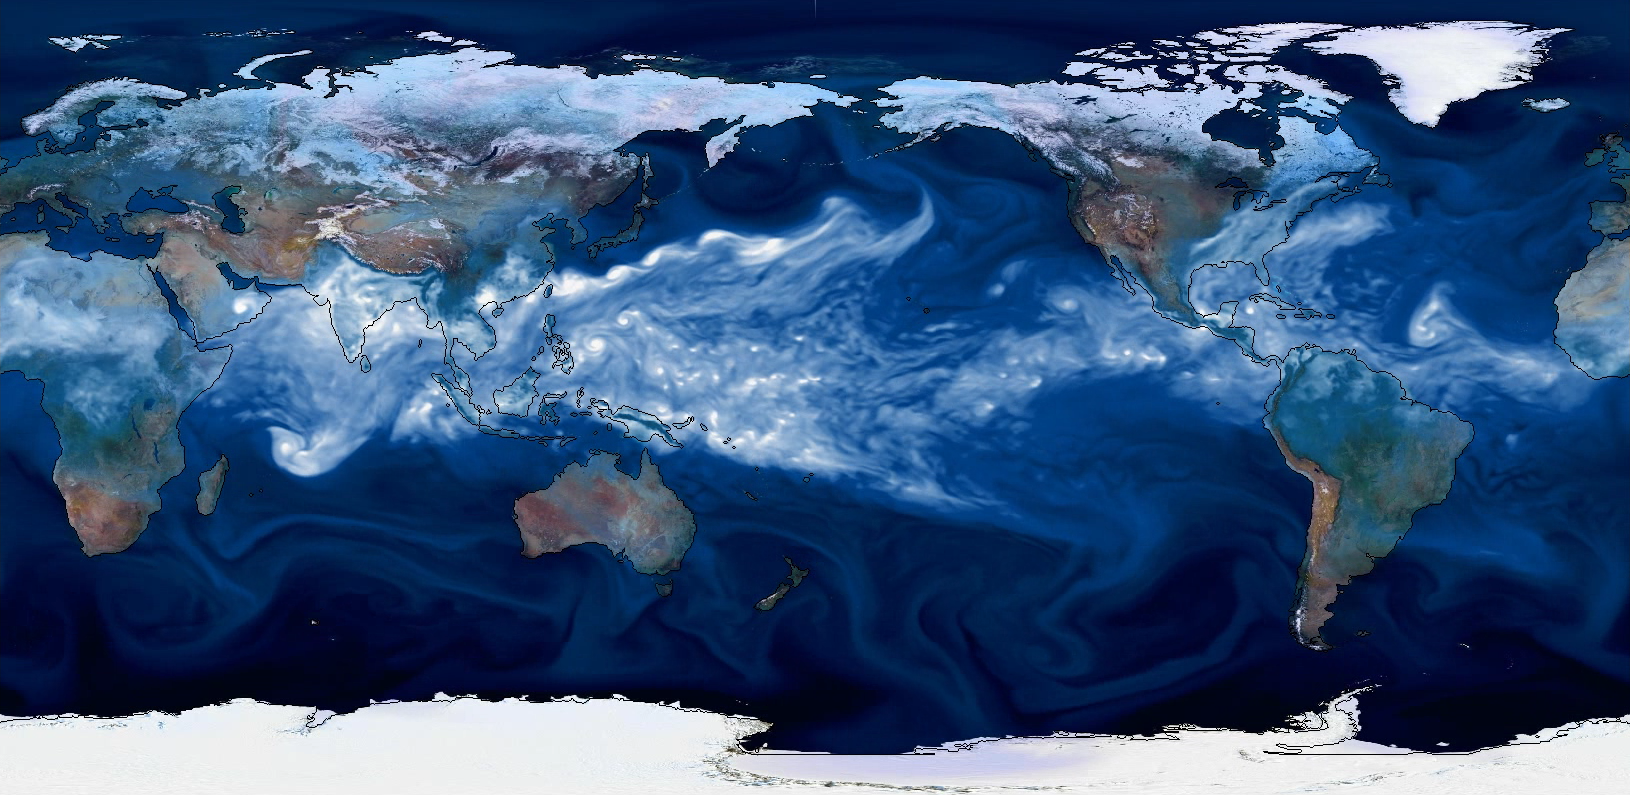 Illustrated map of the Earth with a climate model of ocean eddies